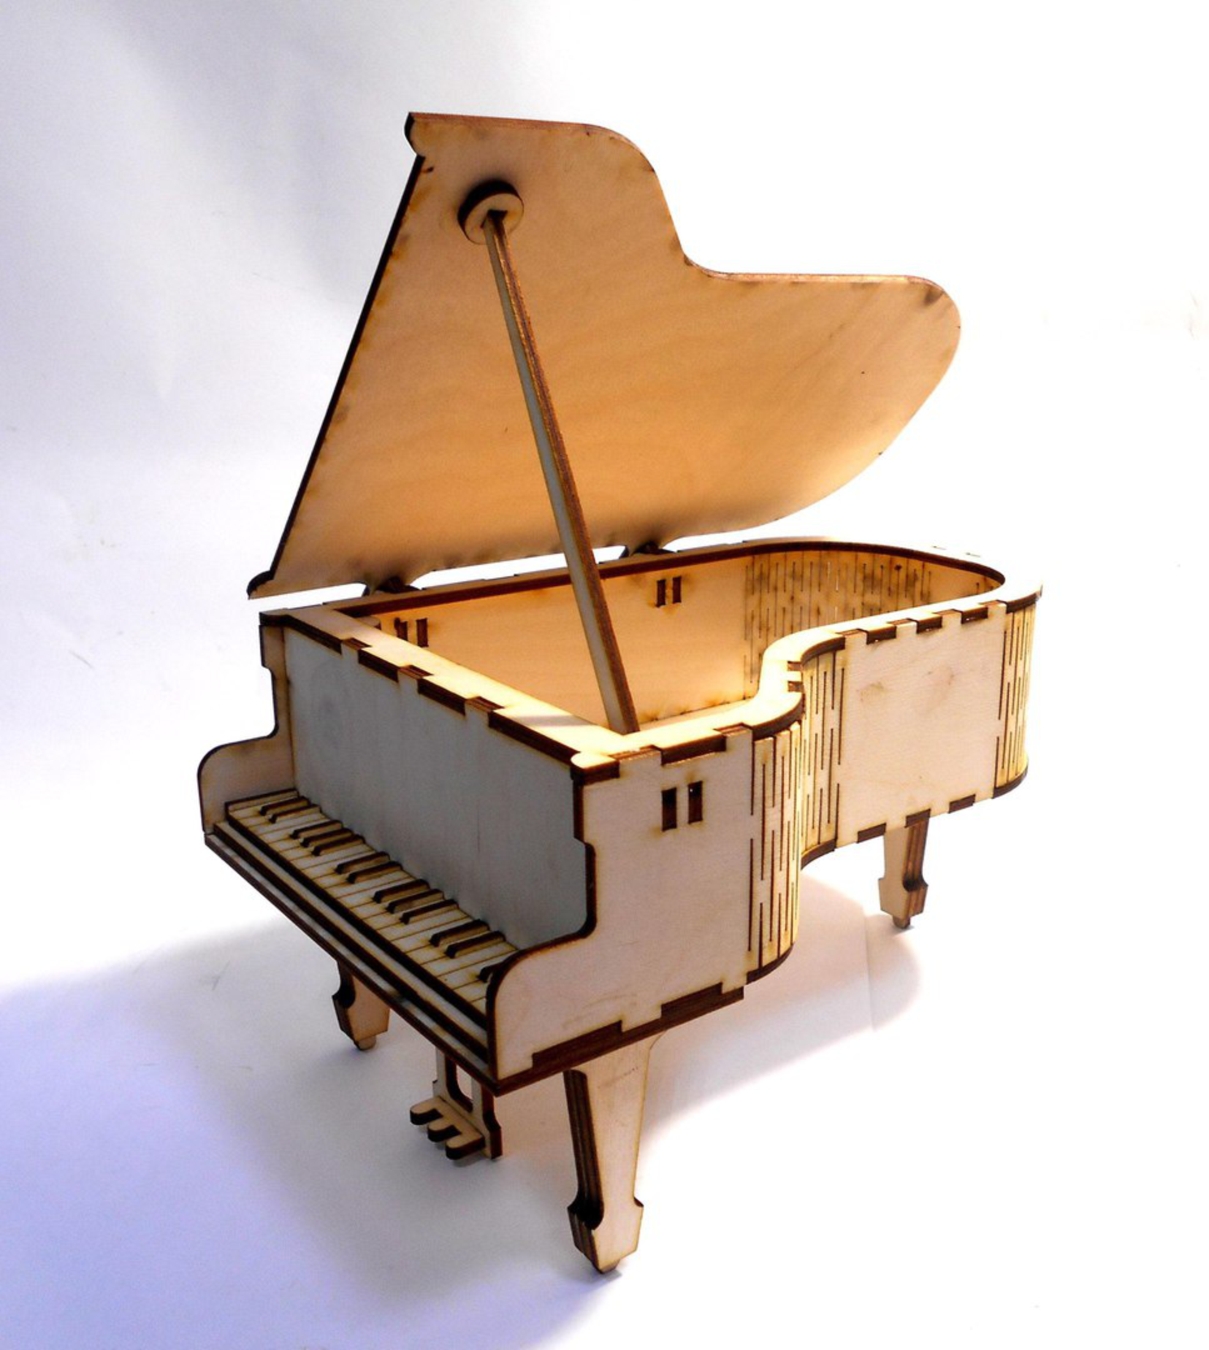 Laser Cut Piano Musical Toys For Kids Free Vector